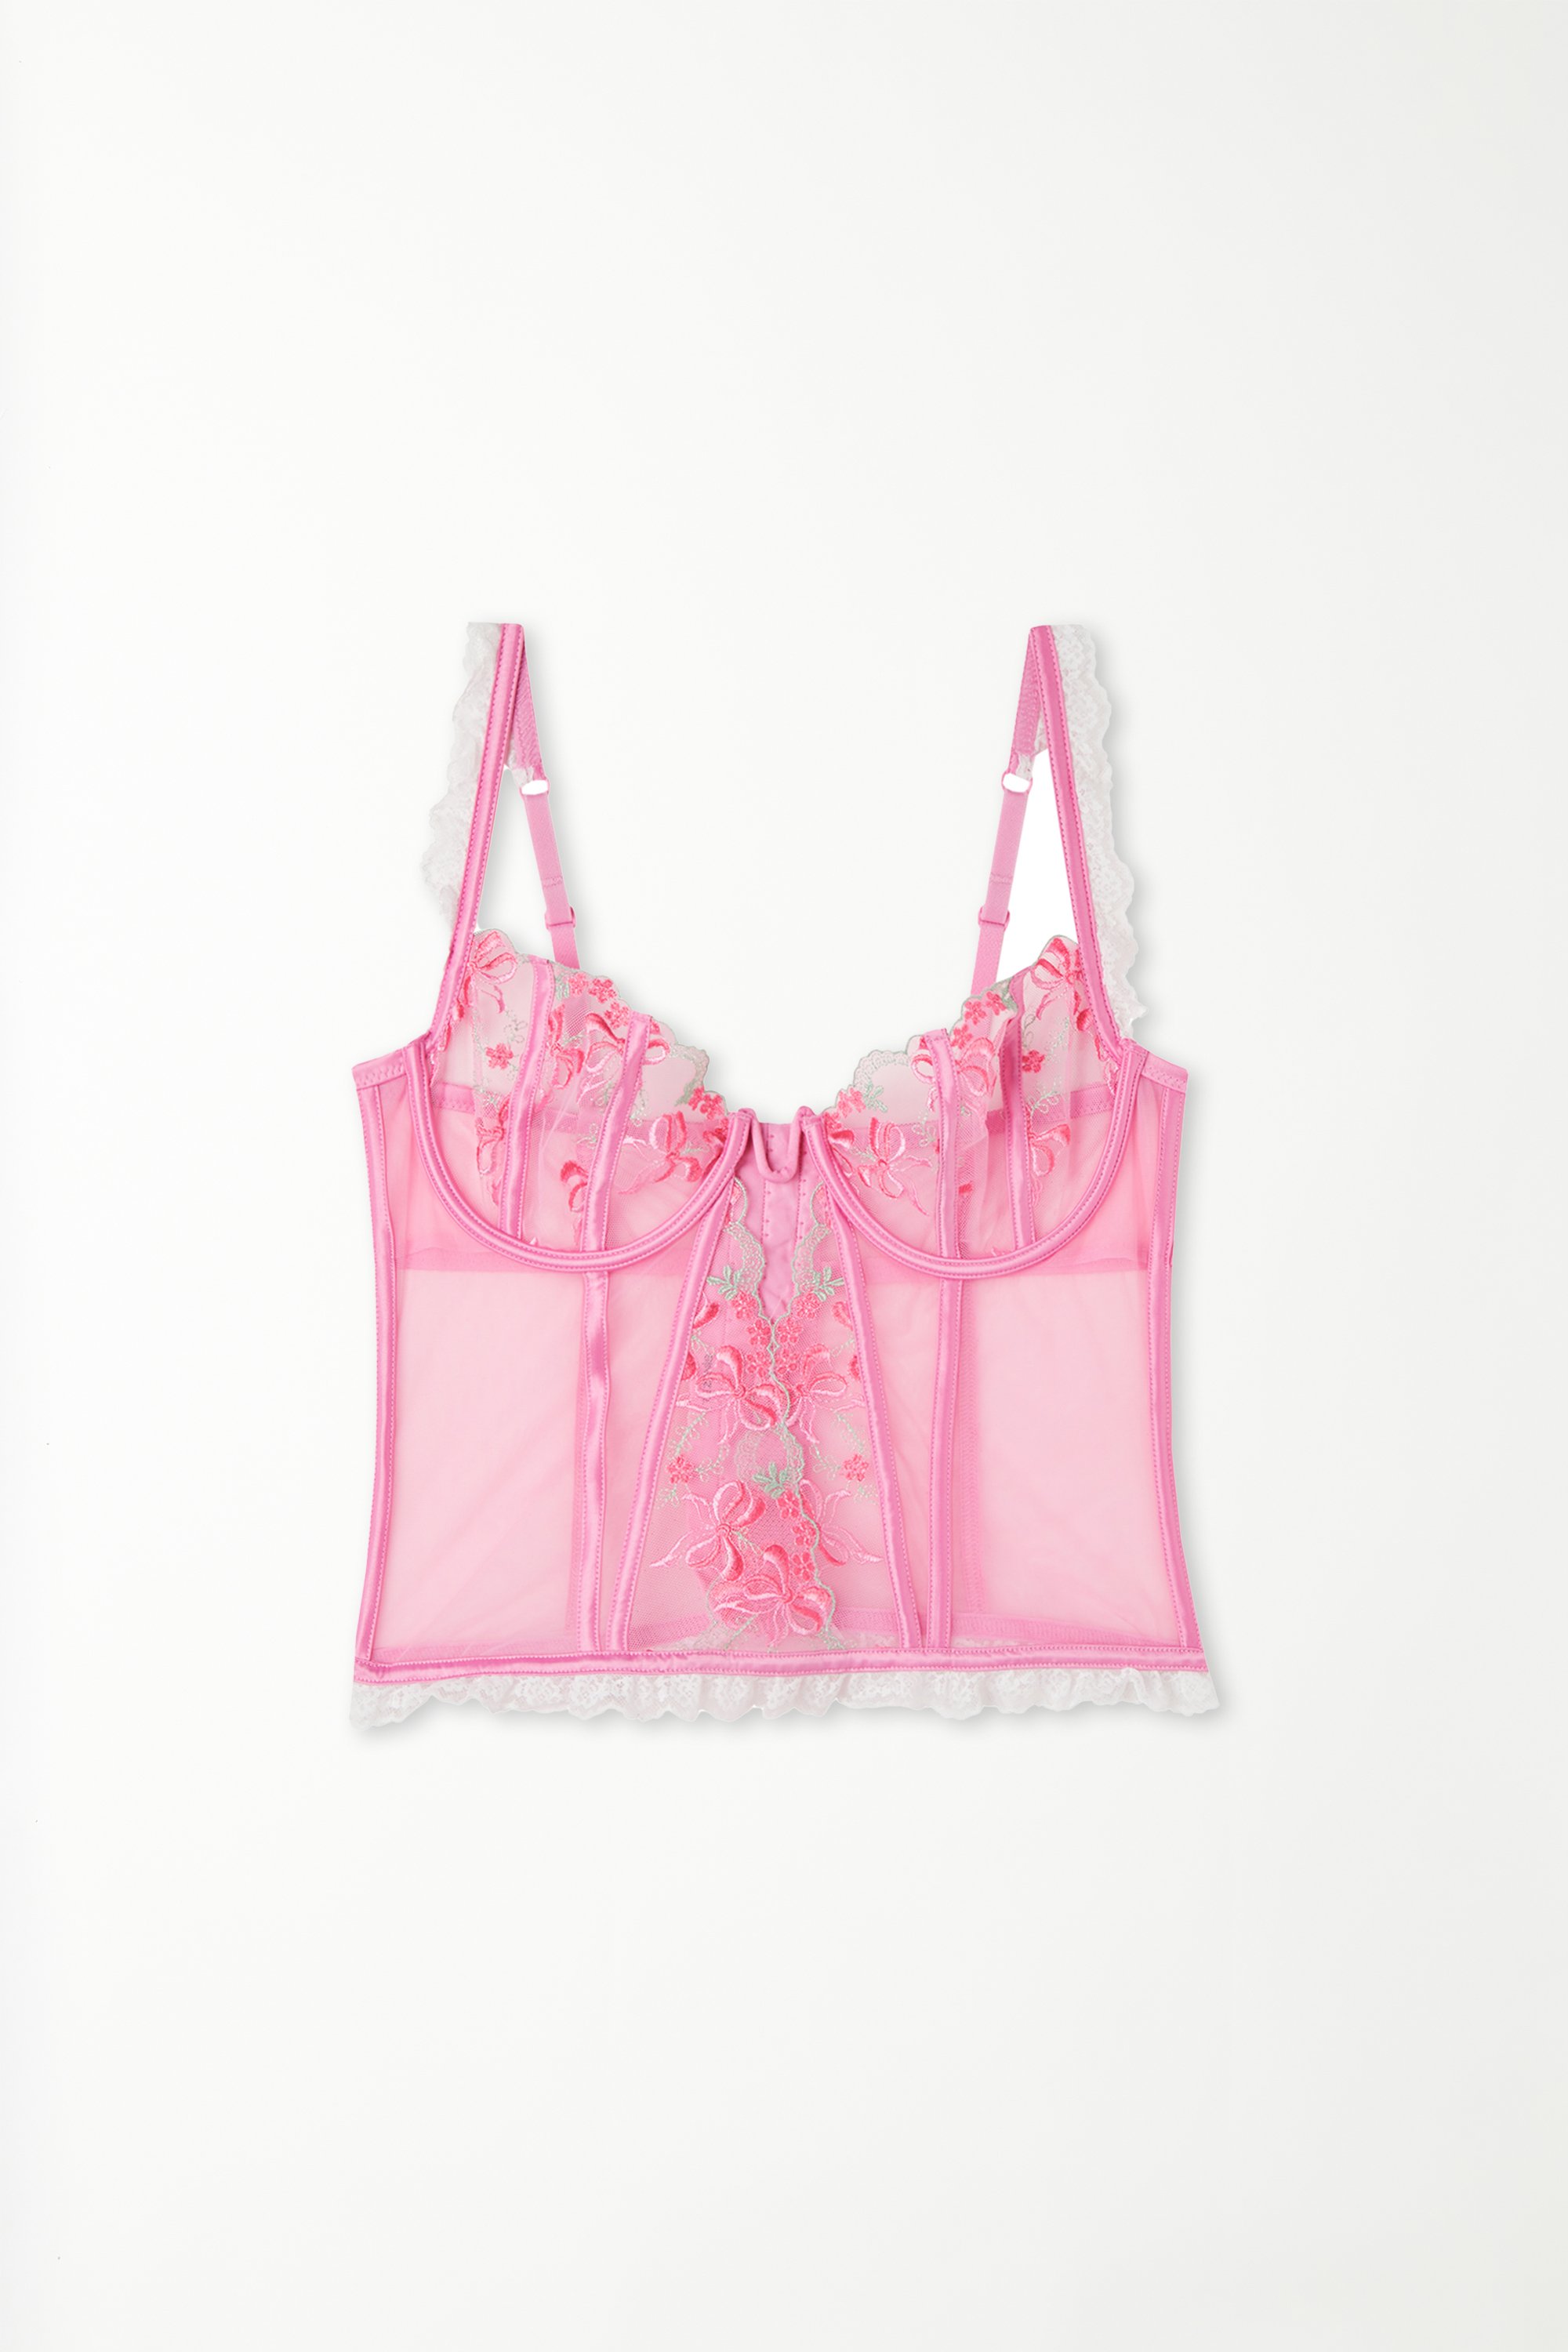 Corpetto Bra Top Balconcino Pink Candy Lace